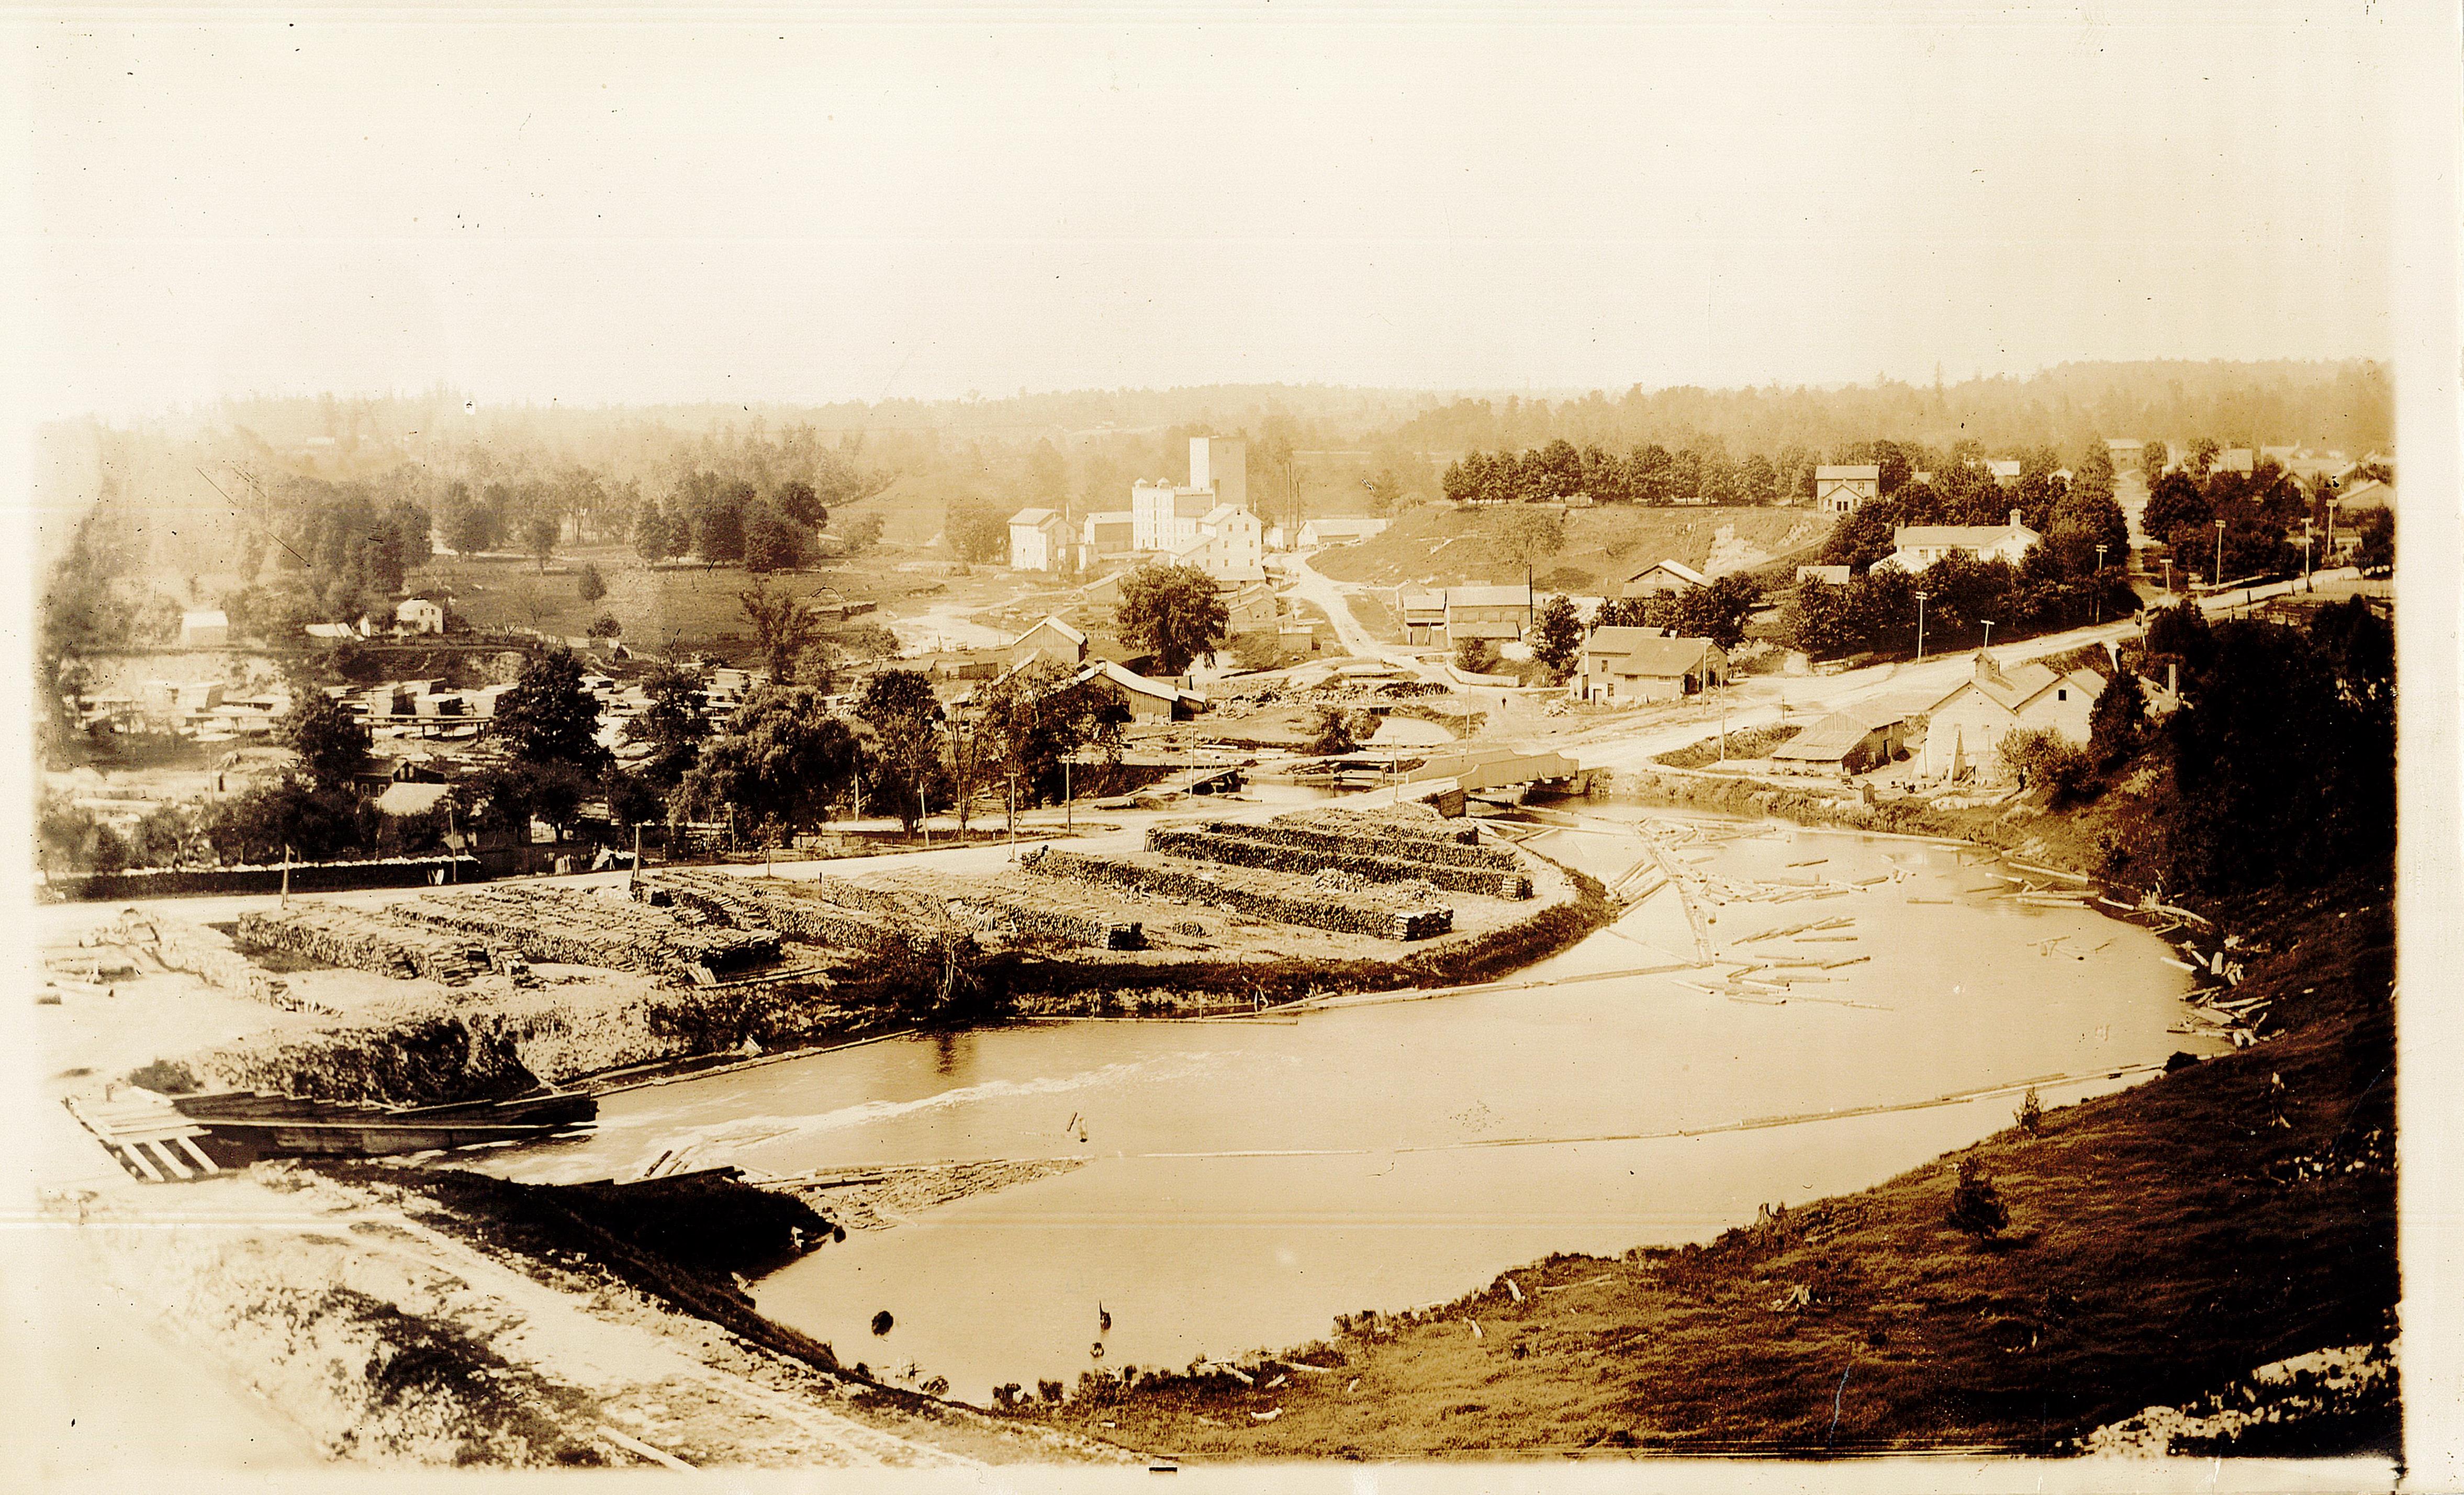 Aerial view of the Tillson mills. A large, light coloured mill is in the distance, with a creek in the foreground. Smaller buildings and trees dot the landscape.